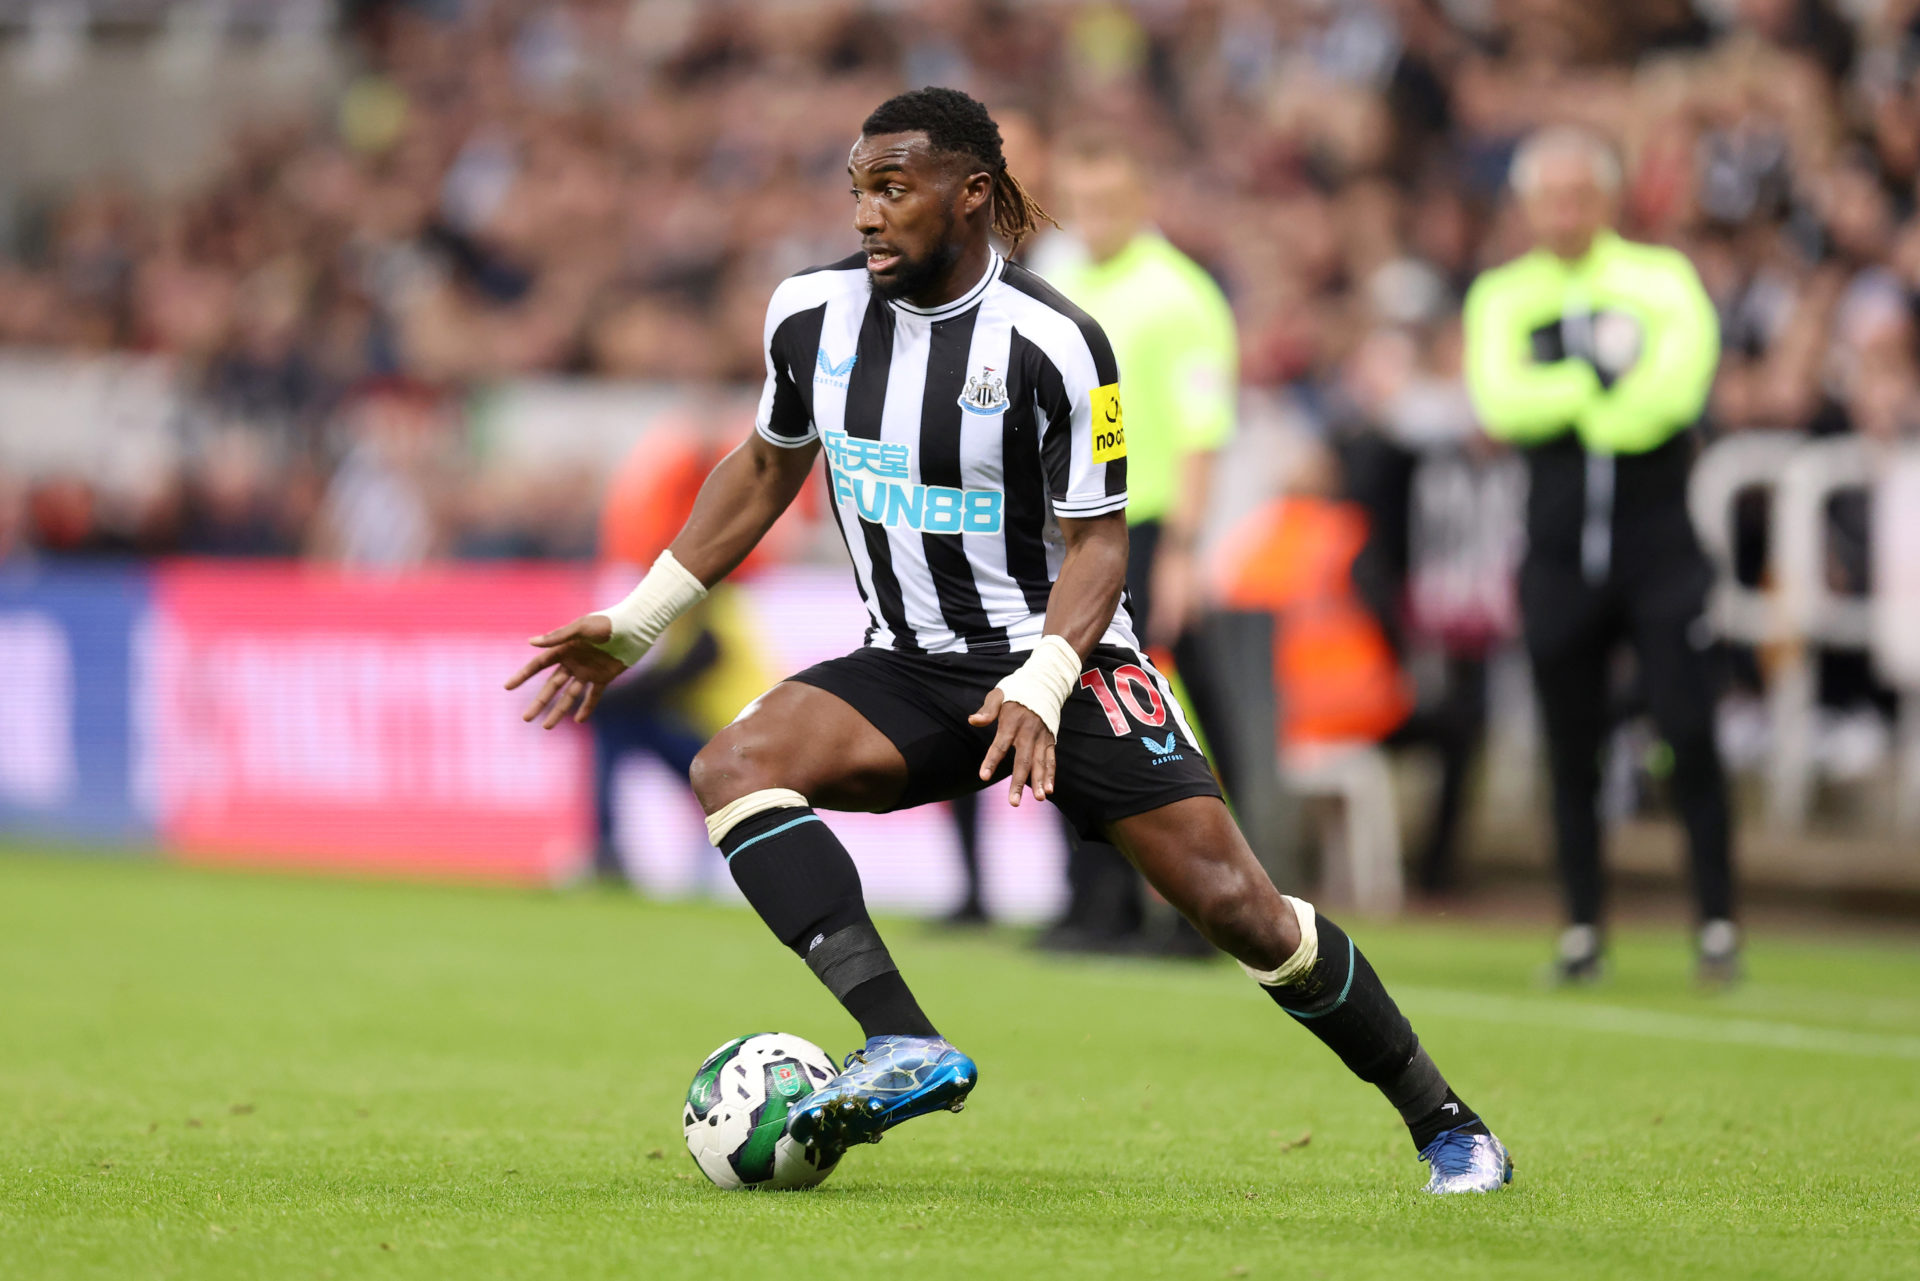 Newcastle United v Crystal Palace - Carabao Cup Third Round